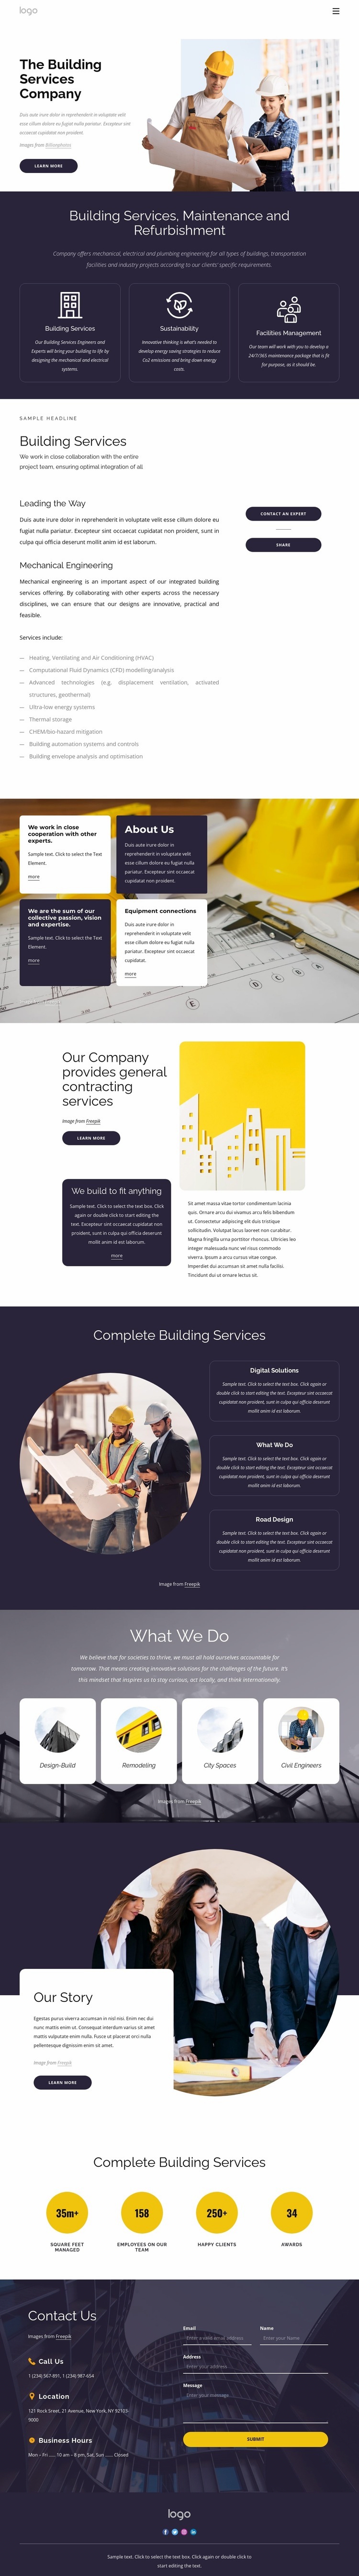 The building services company Homepage Design